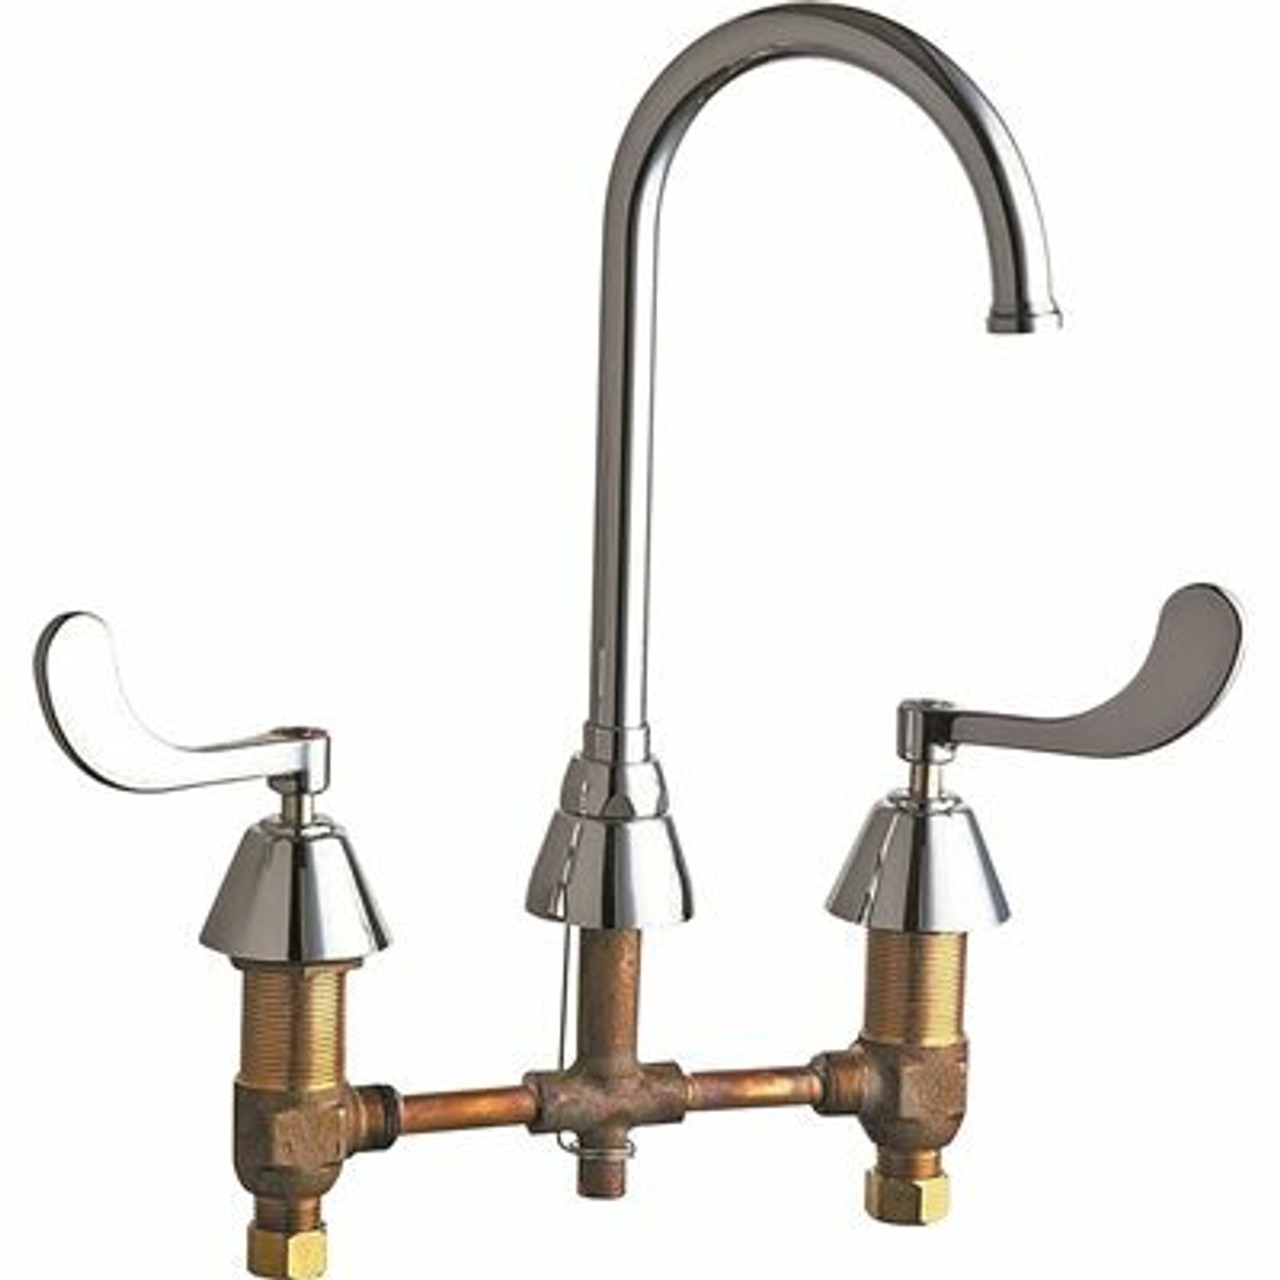 Chicago Faucets 8 In. Widespread 2-Handle High Arc Bathroom Faucet In Chrome With 5-1/4 In. Rigid/Swing Gooseneck Spout